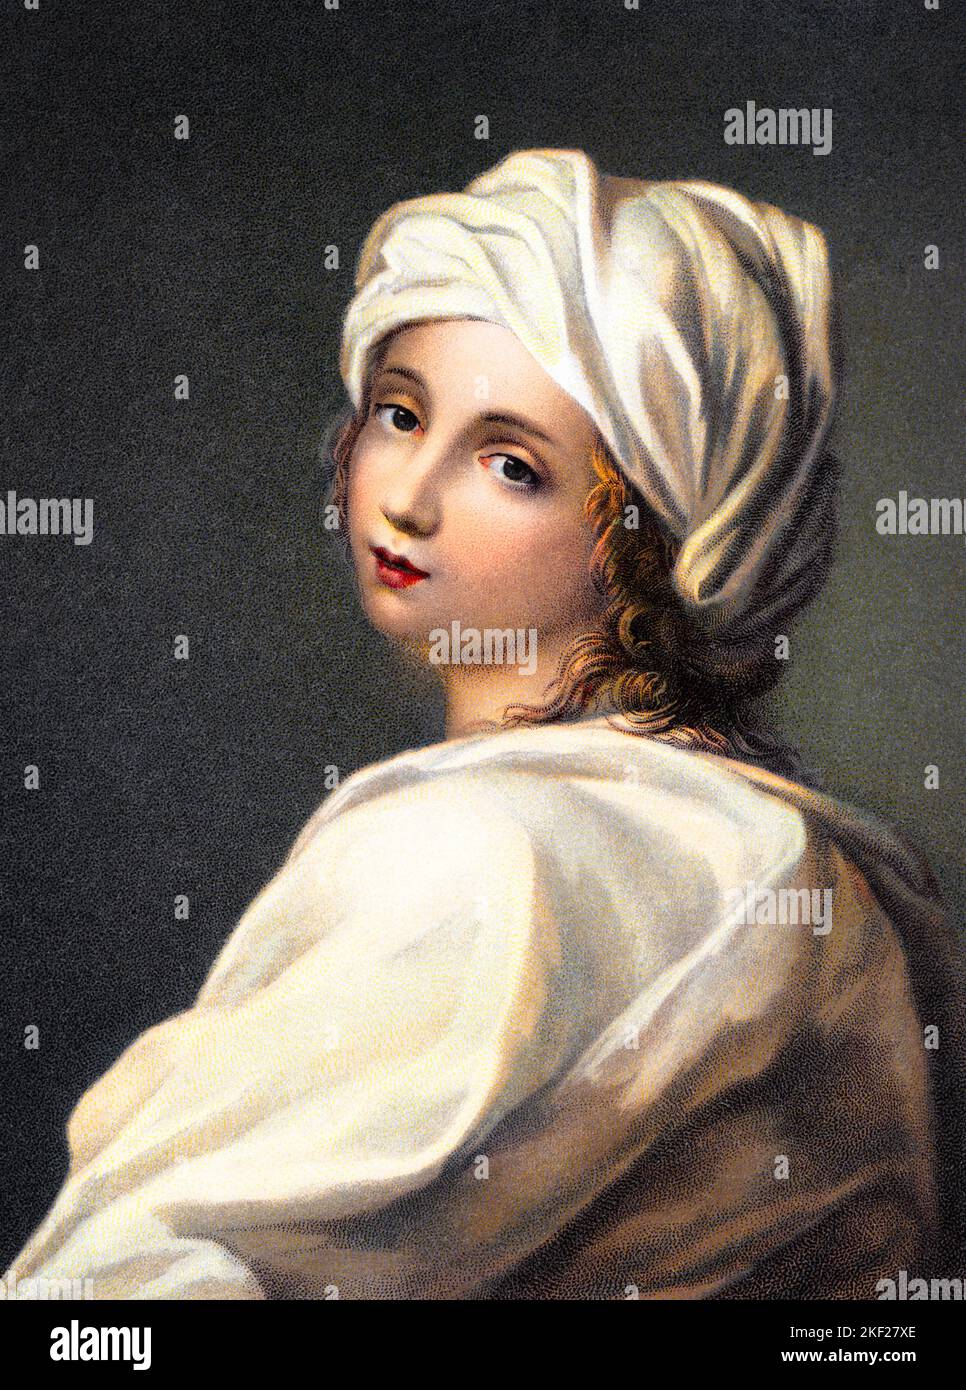 1600s PORTRAIT OF BEATRICE CENCI BY GUIDO RENI BEATRICE WAS EXECUTED BEHEADED BY PAPAL AUTHORITY FOR MURDERING HER FATHER - ka9387 HAR001 HARS MOOD TRAGEDY CONCEPTUAL GLUM DERIVATIVE POSTCARD EXECUTED BEATRICE BEHEADED 1600s GUIDO MISERABLE MURDERING SOLUTIONS TRAGIC YOUNG ADULT WOMAN HAR001 OLD FASHIONED Stock Photo